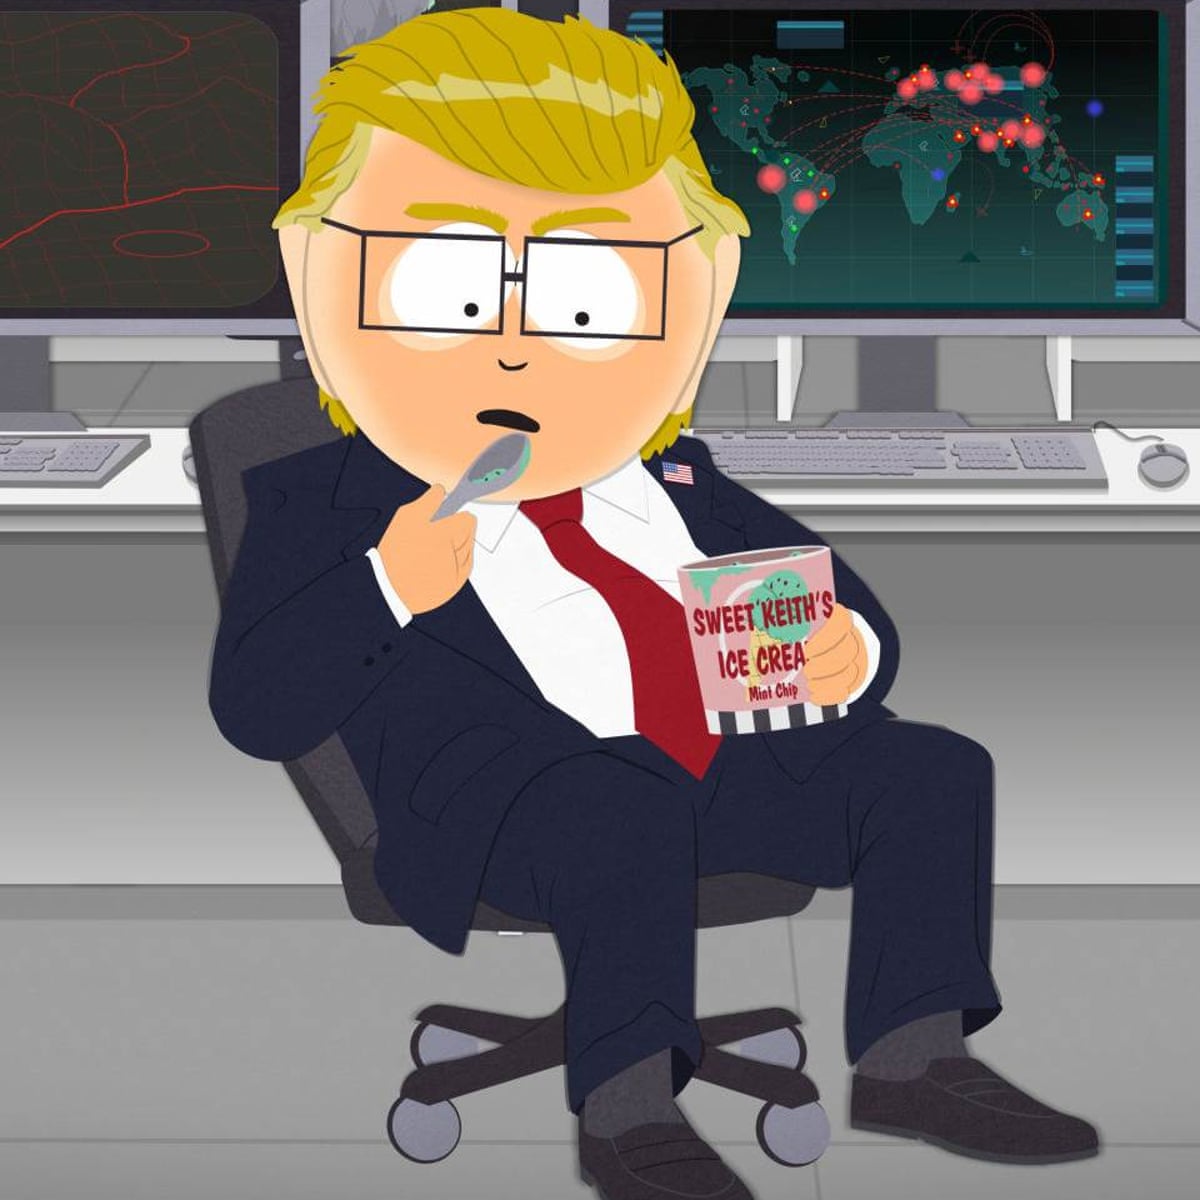 South Park creators to back off Trump jokes: 'Satire has become reality', South  Park